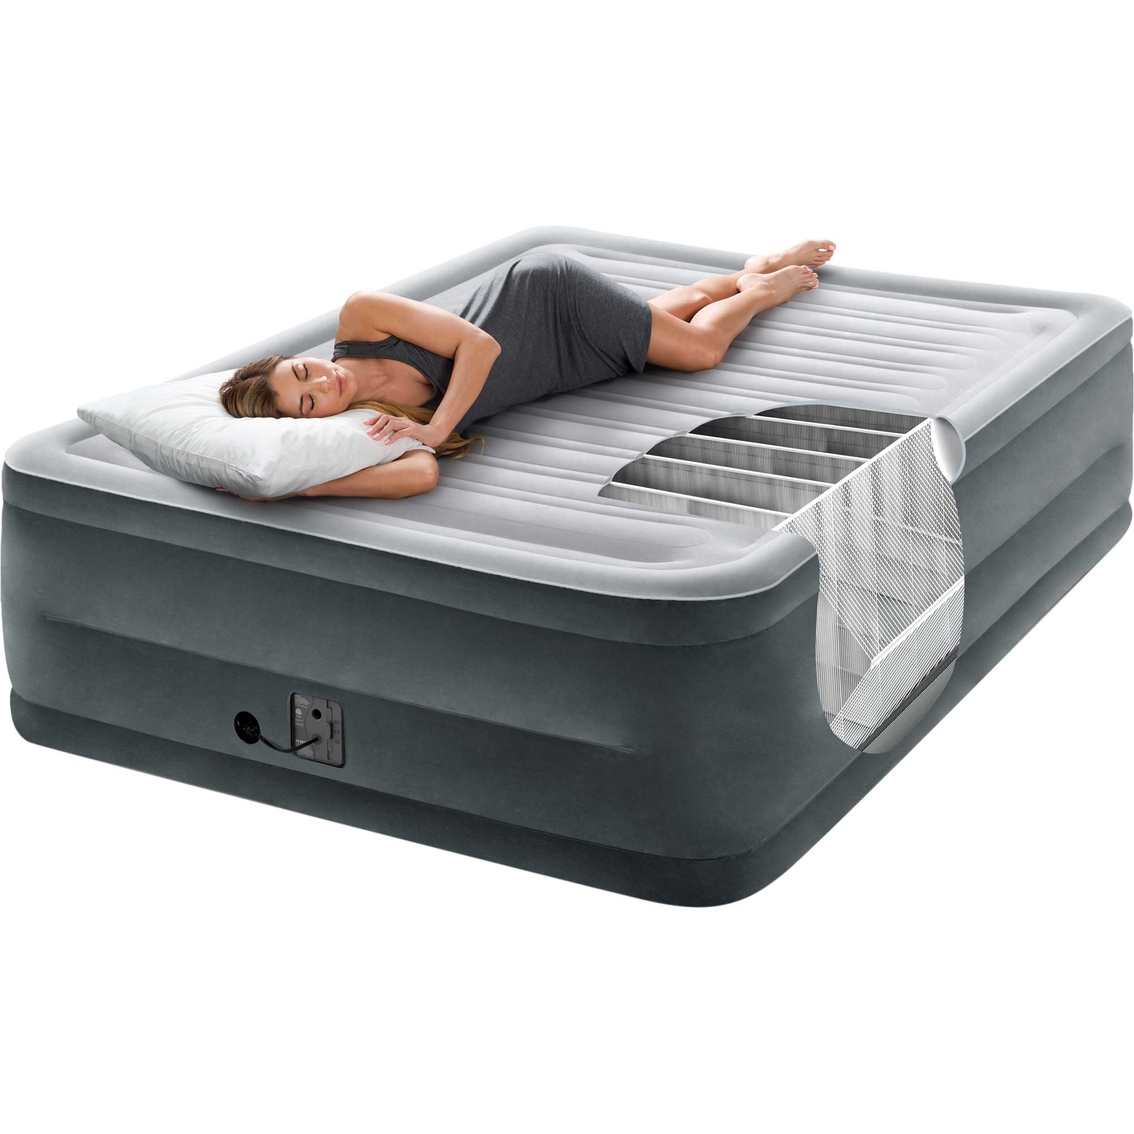 1Intex Raised 22 Queen Size Air Mattress With Built In Pump Bed Camping Matress 